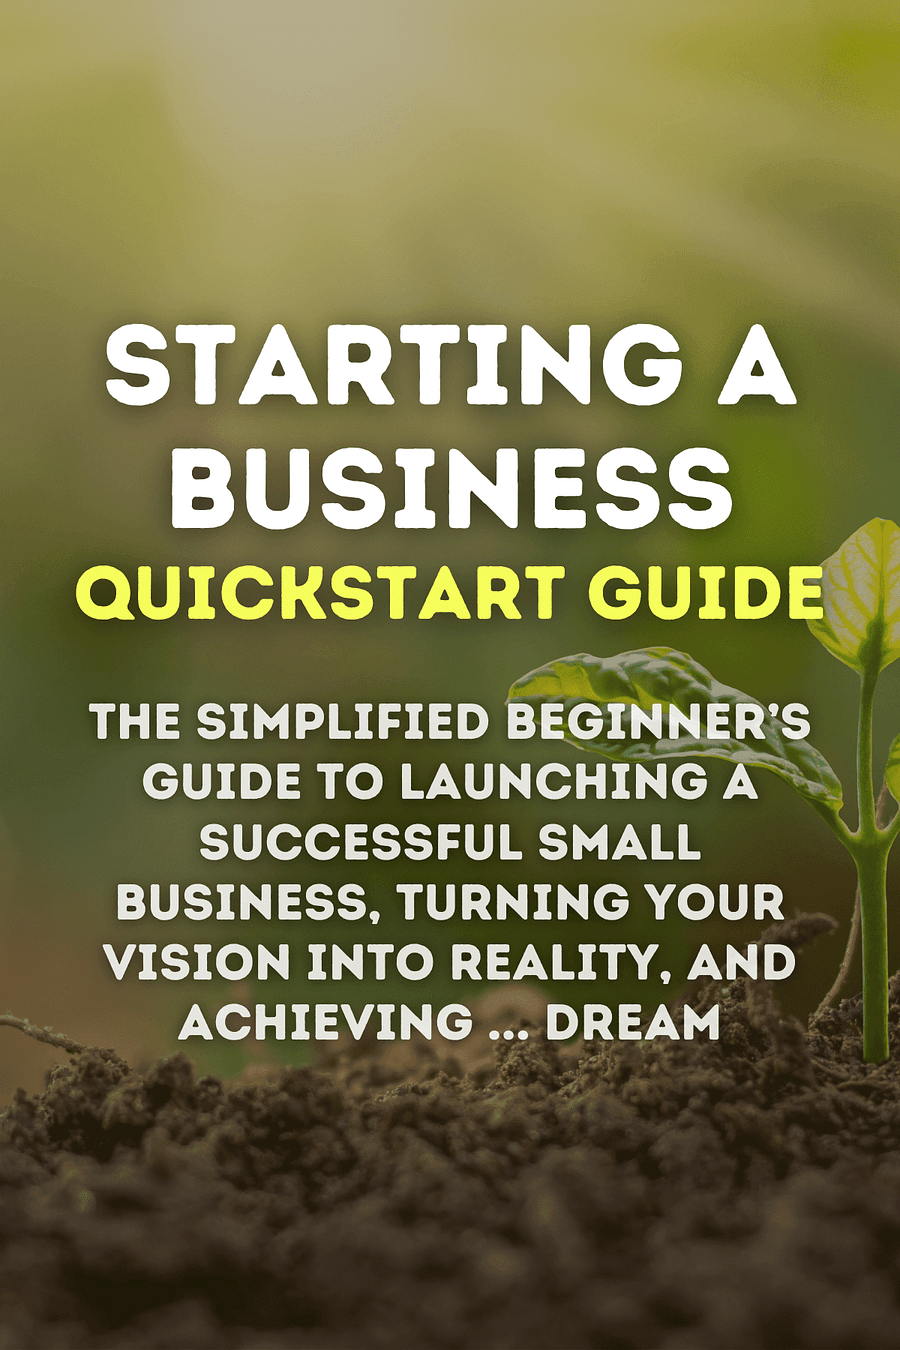 Starting a Business QuickStart Guide by Ken Colwell PhD MBA - Book Summary